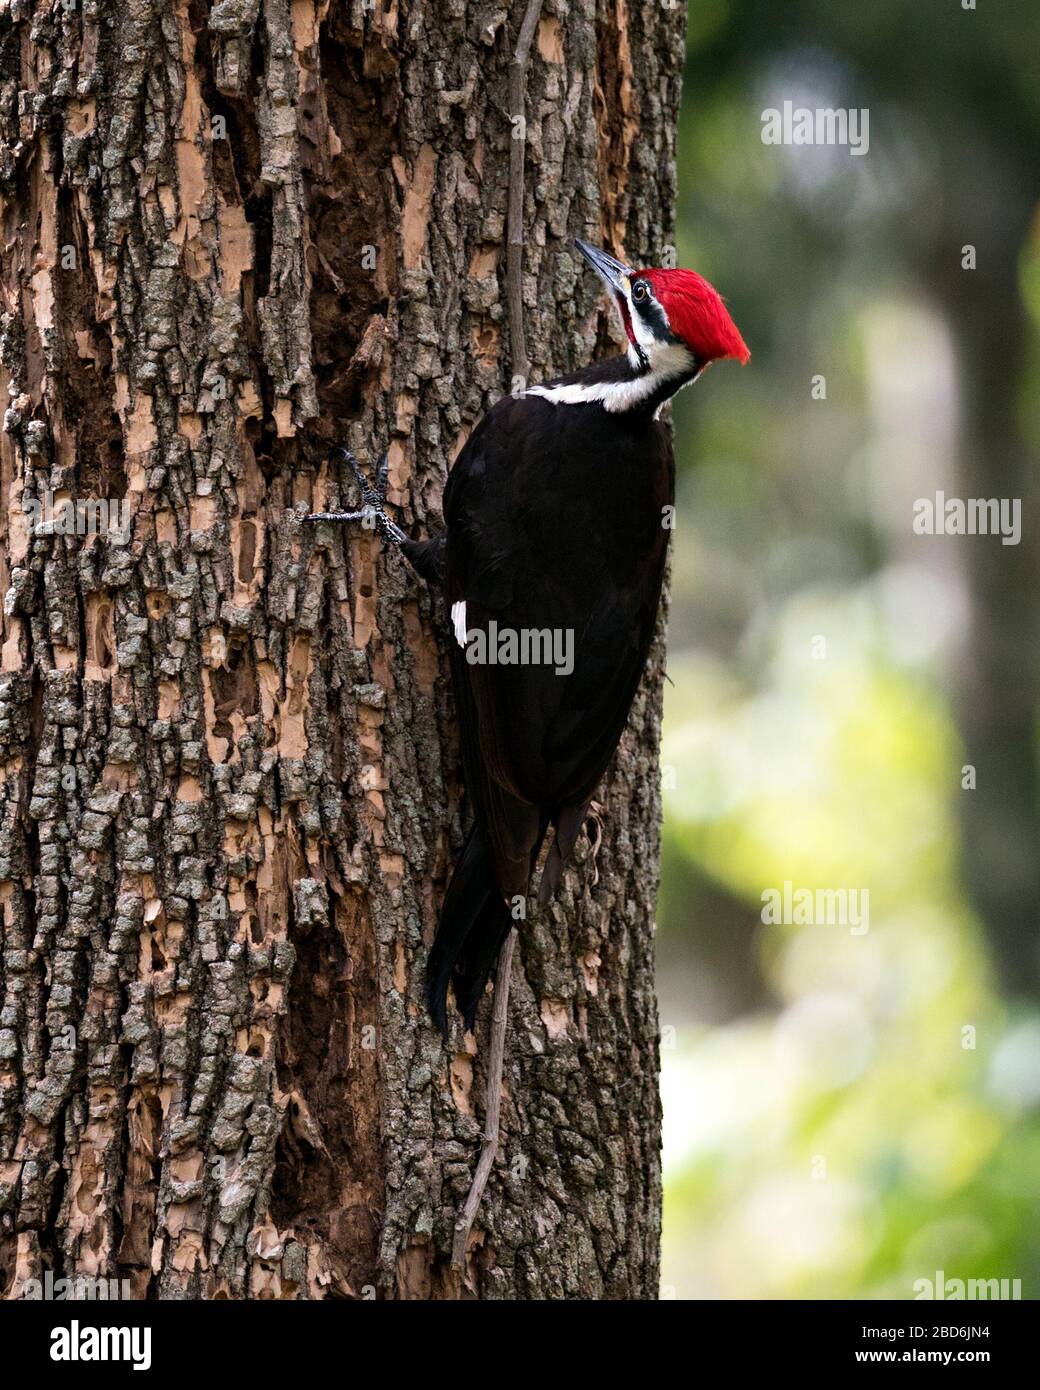 Woodpecker bird perched on a tree displaying body, plumage in its environment and surrounding in the forest with a blur background. Stock Photo